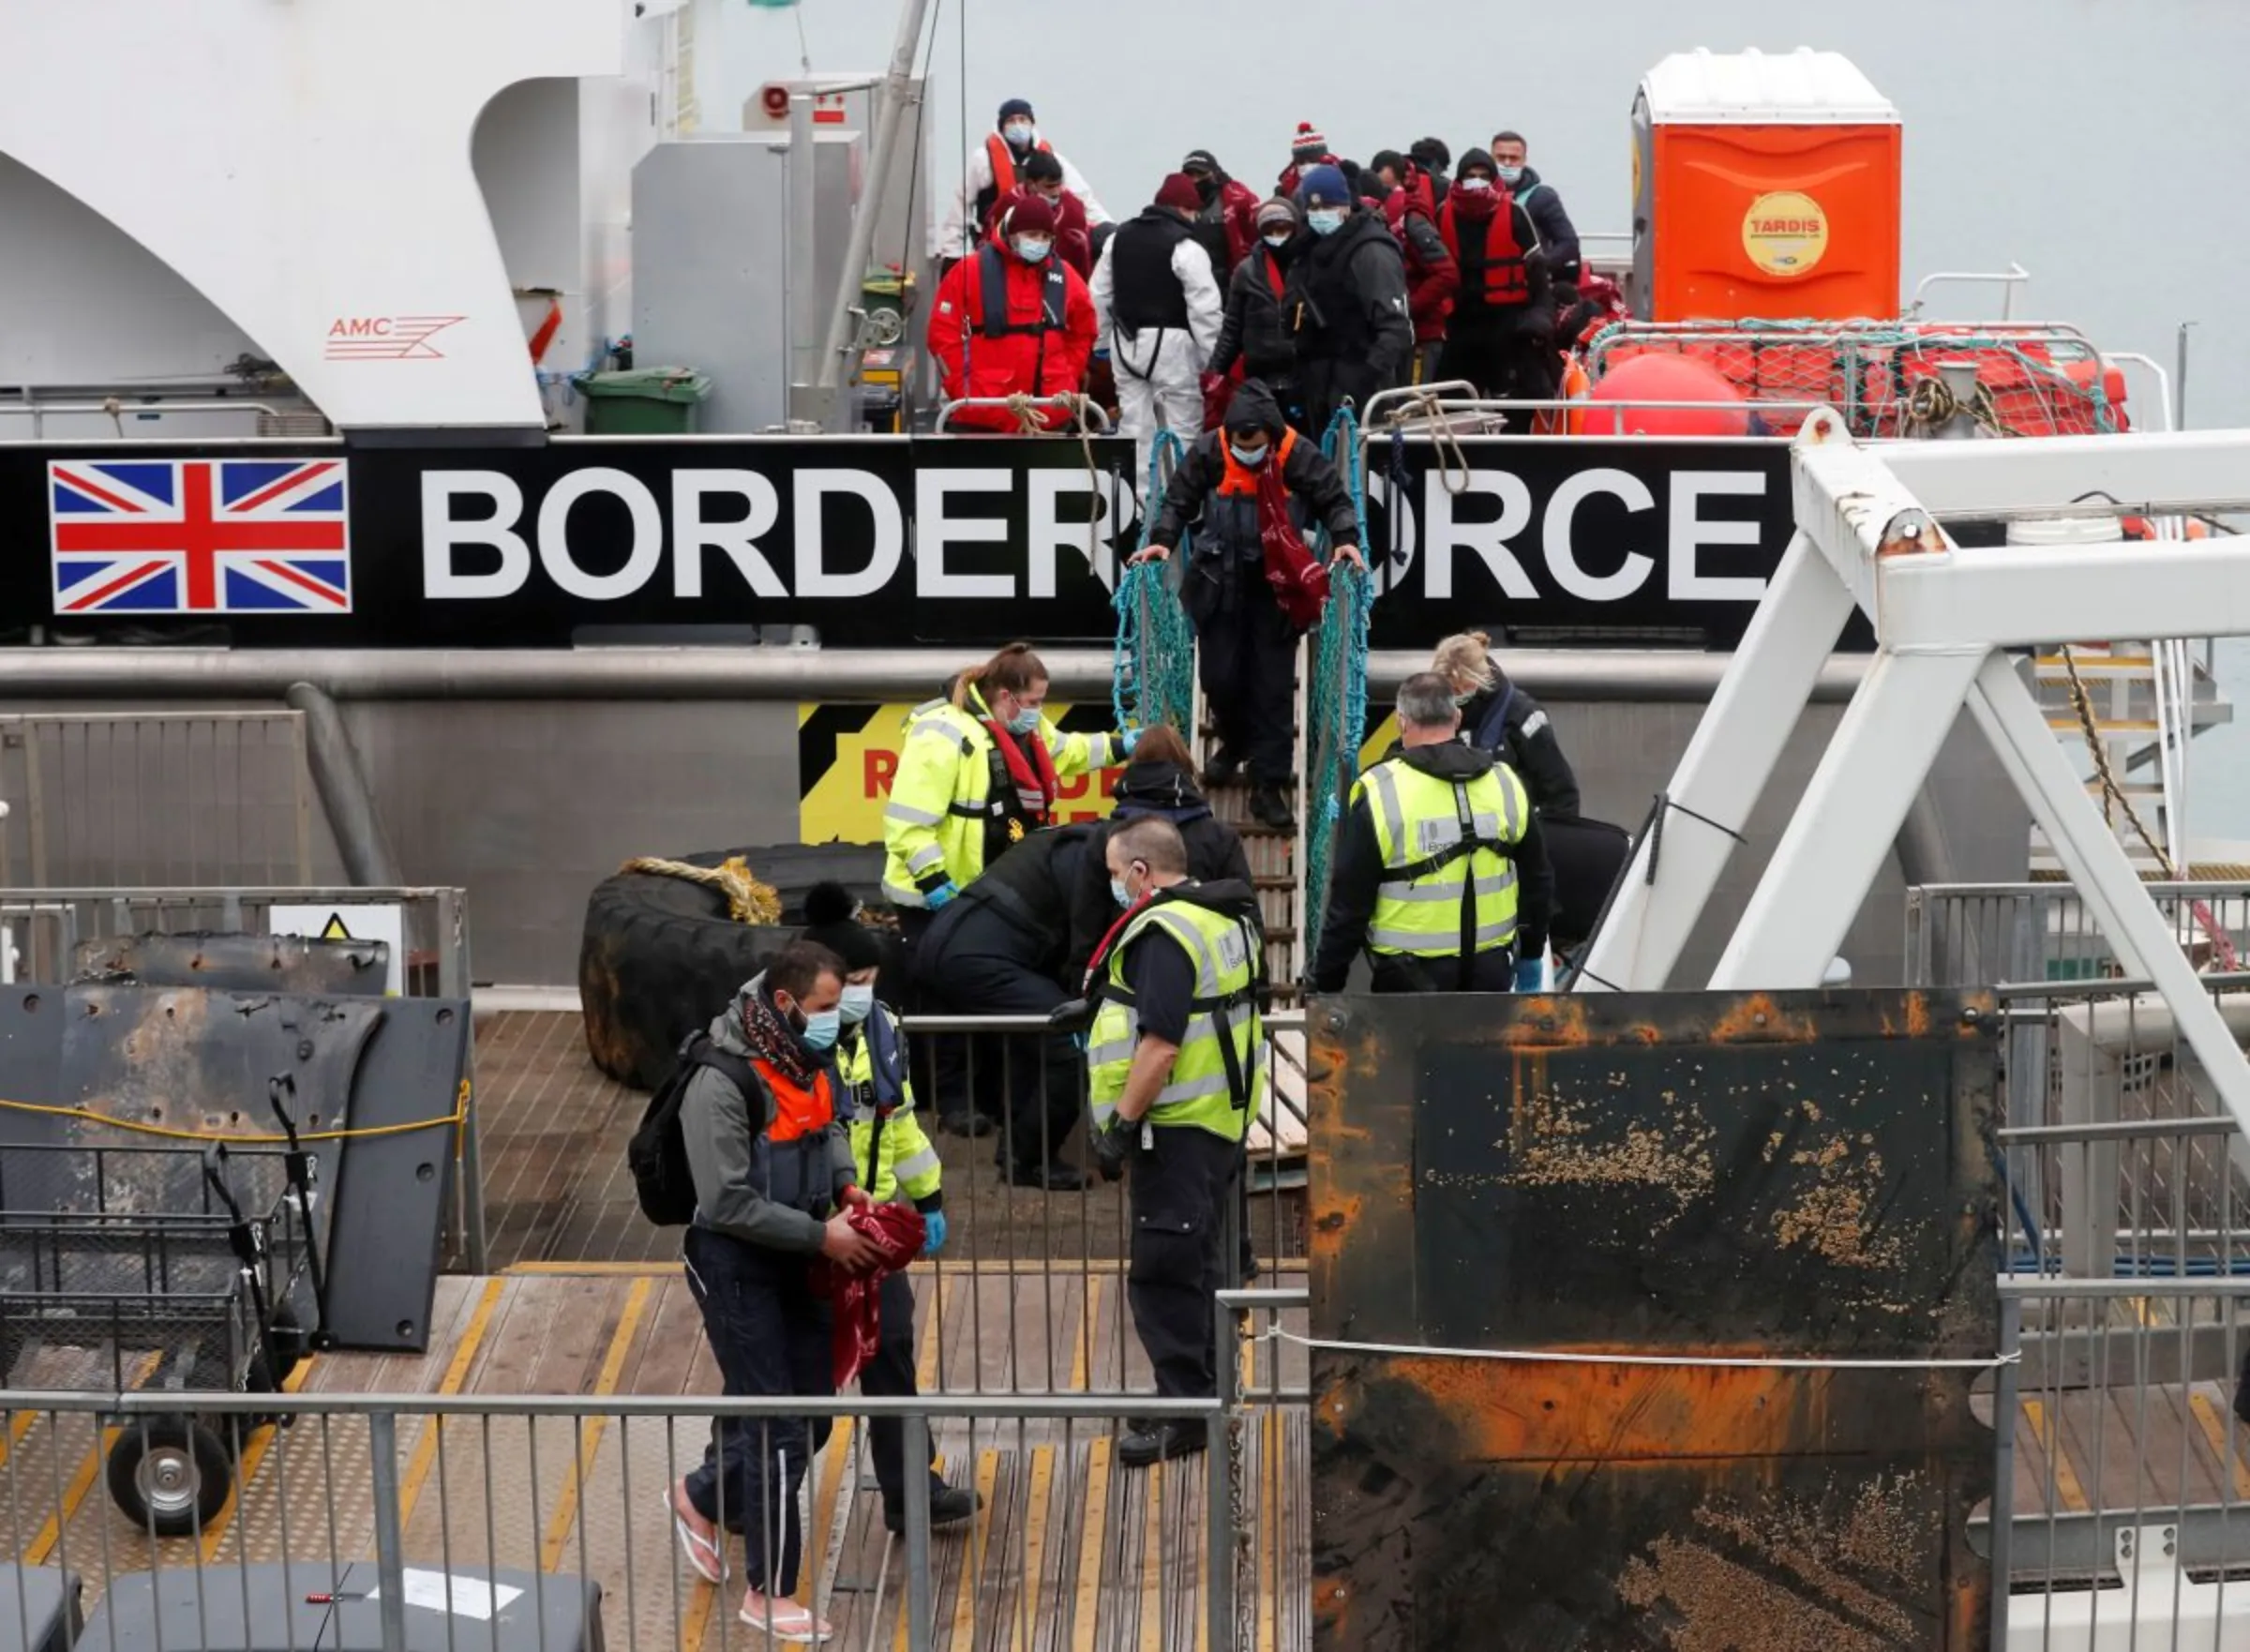 Migrants who arrived onboard a Border Force rescue boat are escorted by Border Force staff, after having crossed the channel, at Dover harbour in Dover, Britain, December 15, 2021. REUTERS/Matthew Childs